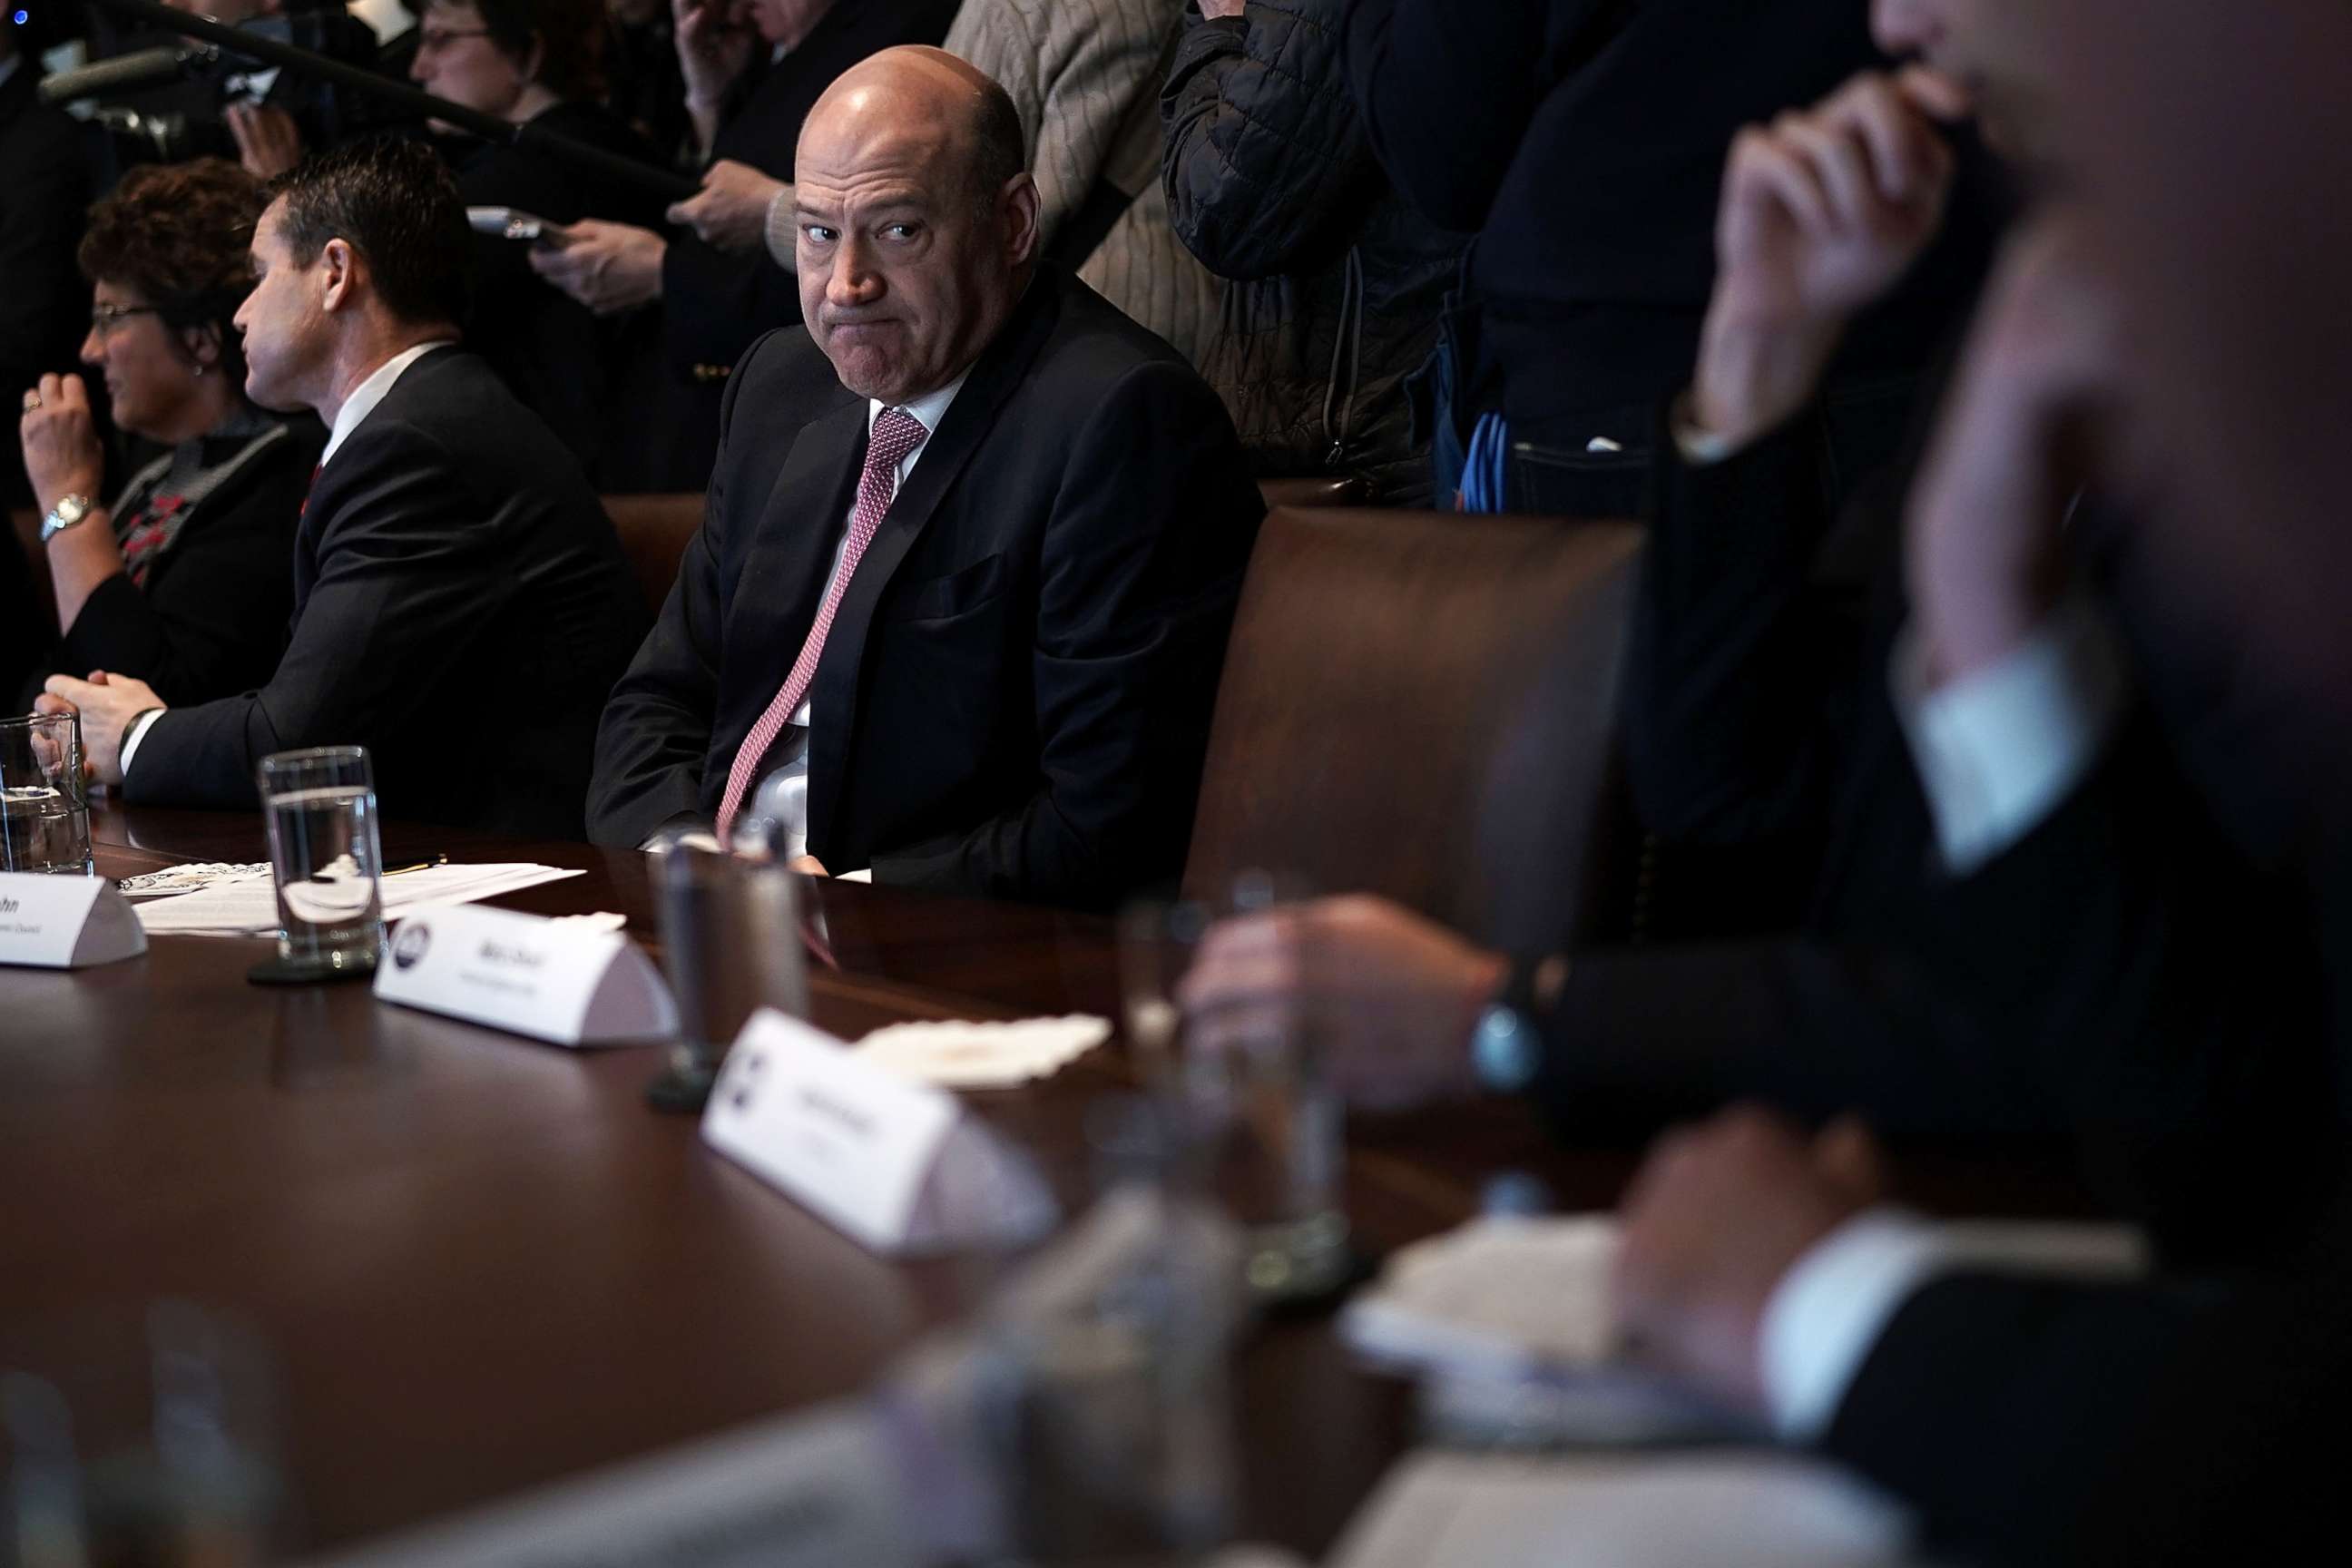 PHOTO: Director of the National Economic Council Gary Cohn listens during a meeting between President Donald Trump and congressional members in the Cabinet Room of the White House, Feb. 13, 2018 in Washington.